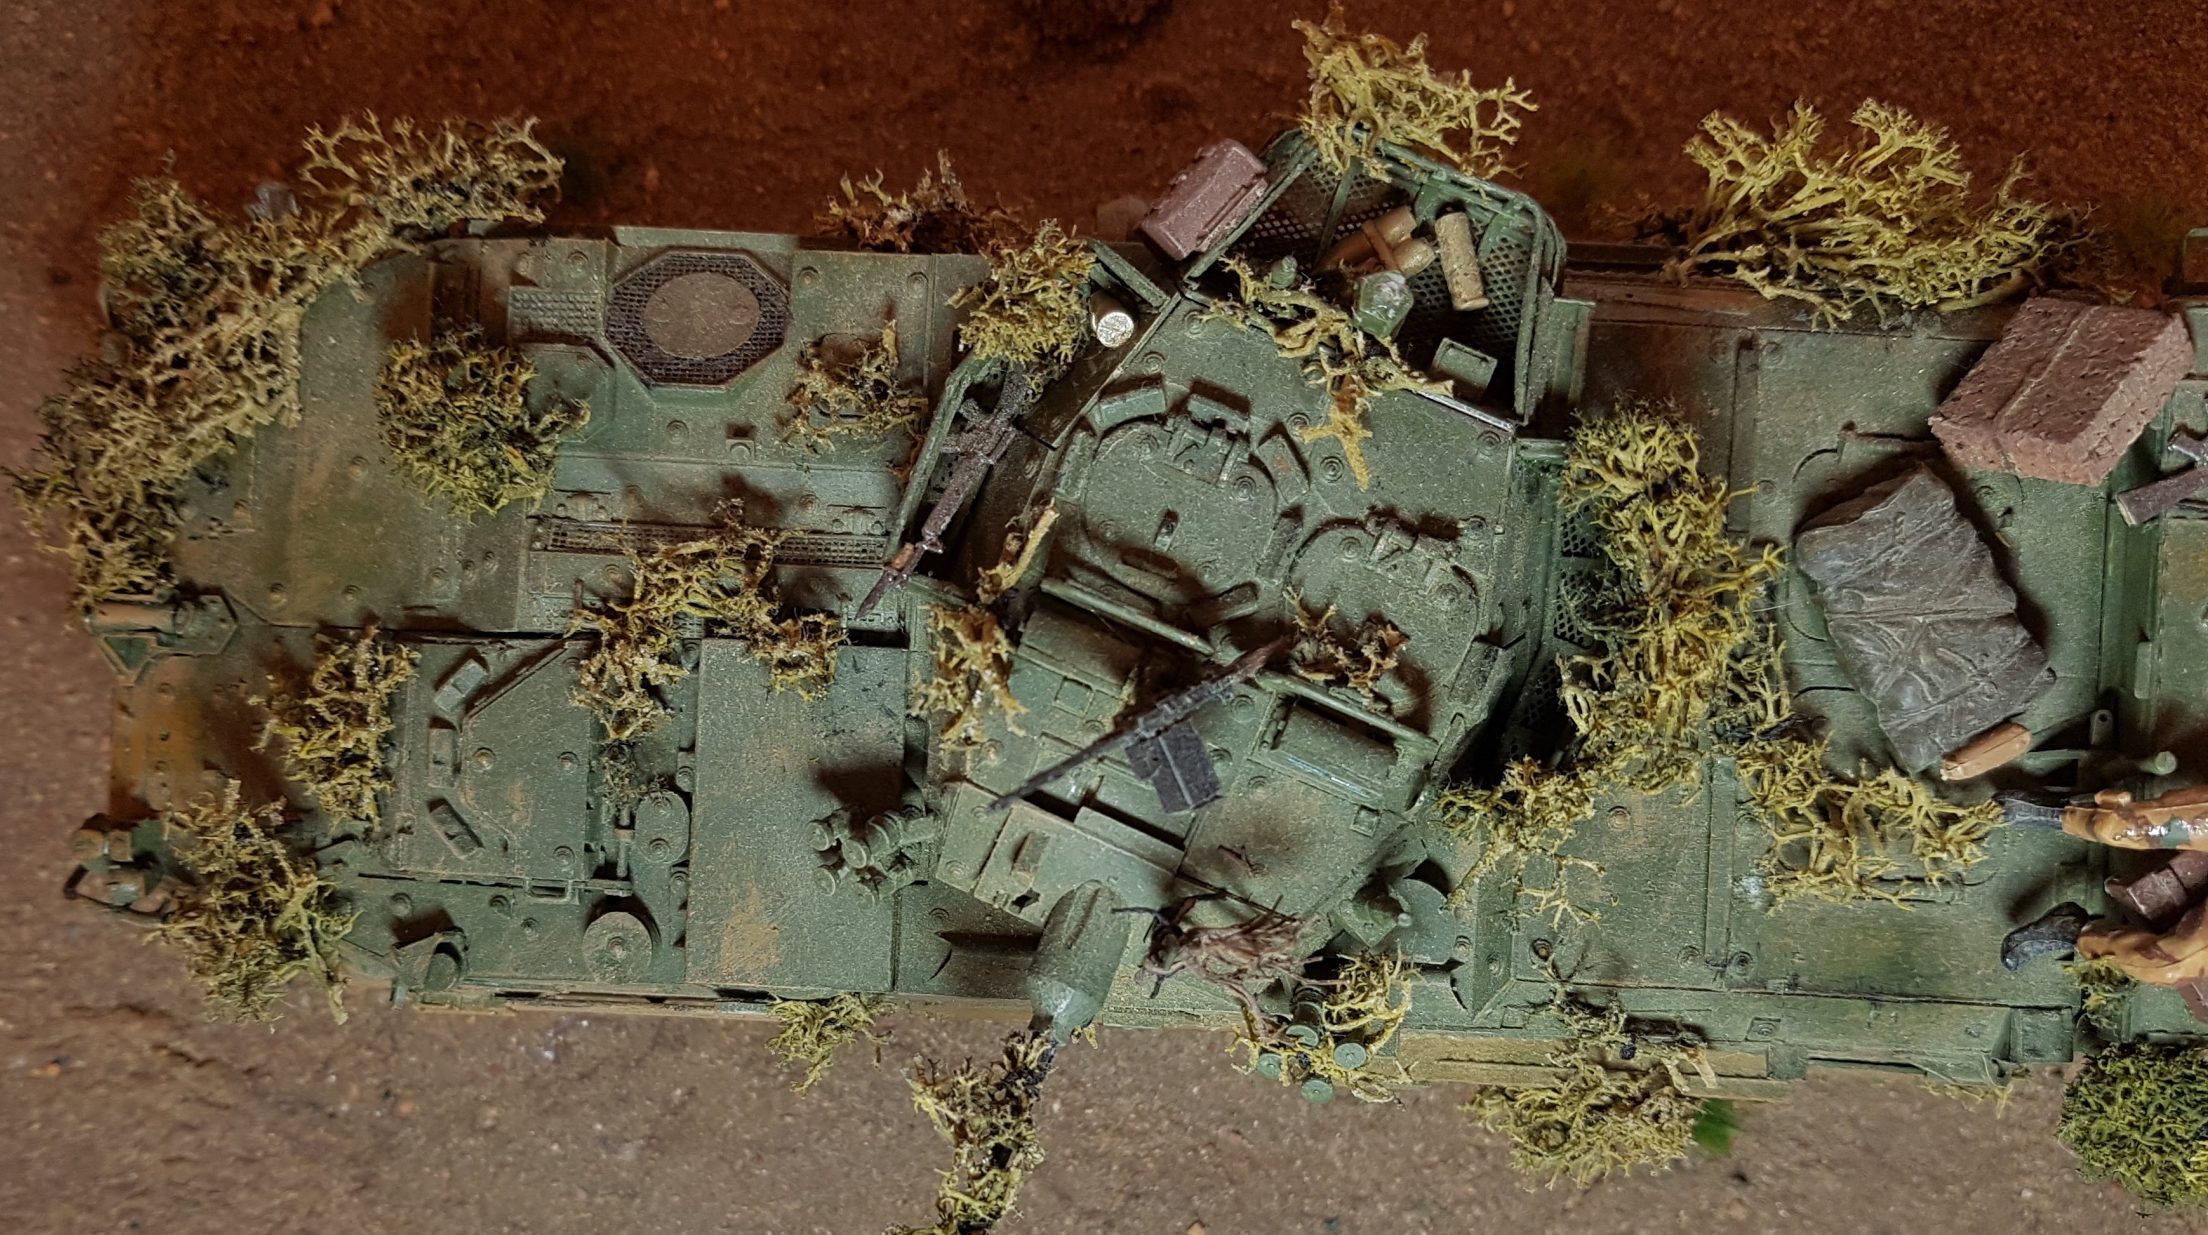 Model of LAV 3/III - Top View - 1/35 Scale - Built By Wright Built - Trumpeter Models